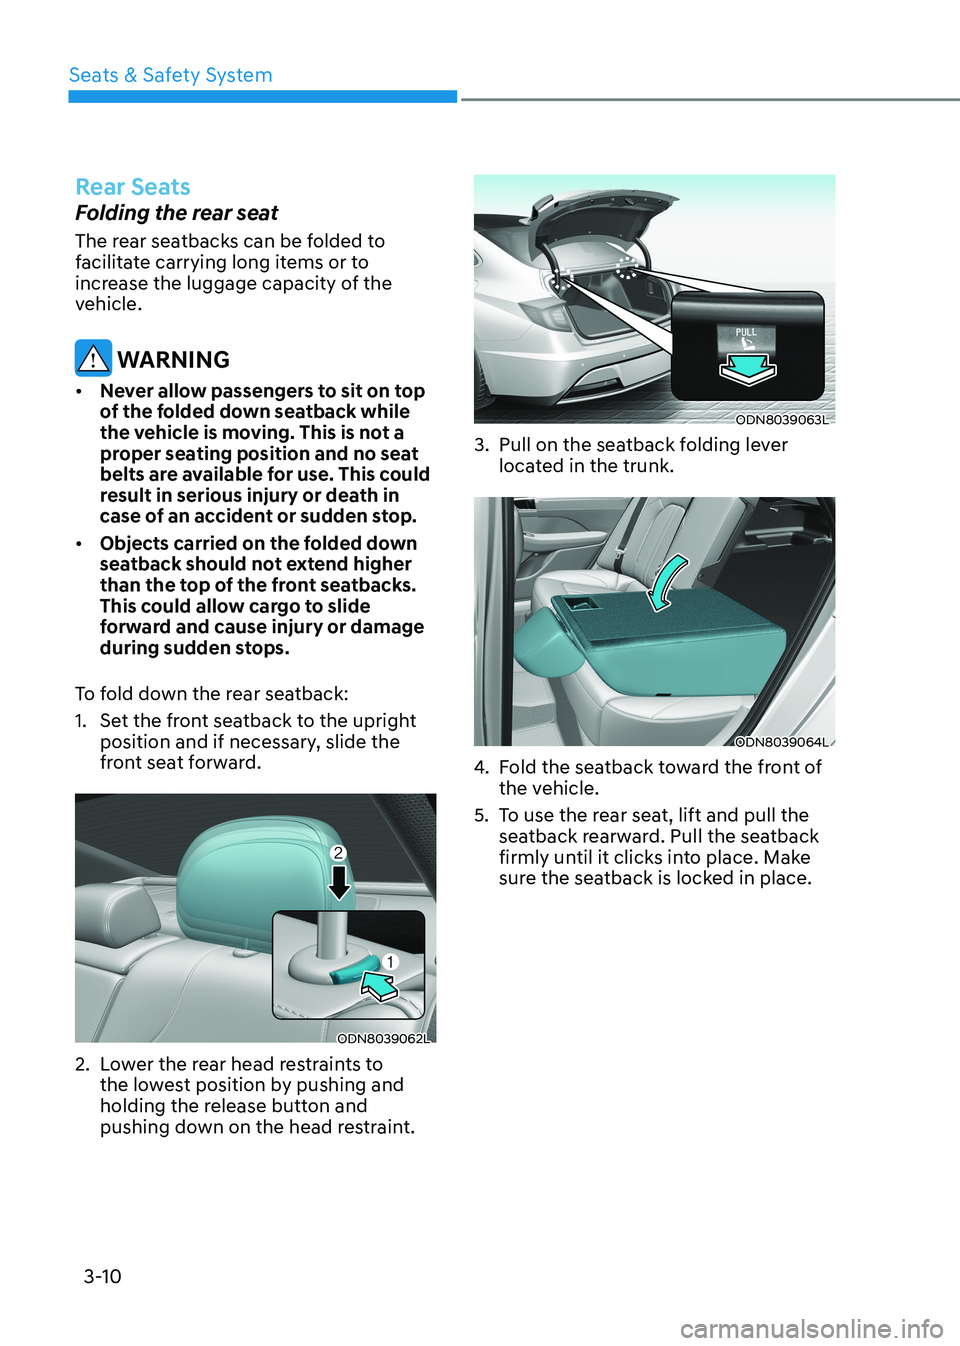 HYUNDAI SONATA 2023  Owners Manual Seats & Safety System
3-10
Rear Seats
Folding the rear seat 
The rear seatbacks can be folded to  
facilitate carrying long items or to 
increase the luggage capacity of the 
vehicle.
 WARNING
•	 Ne